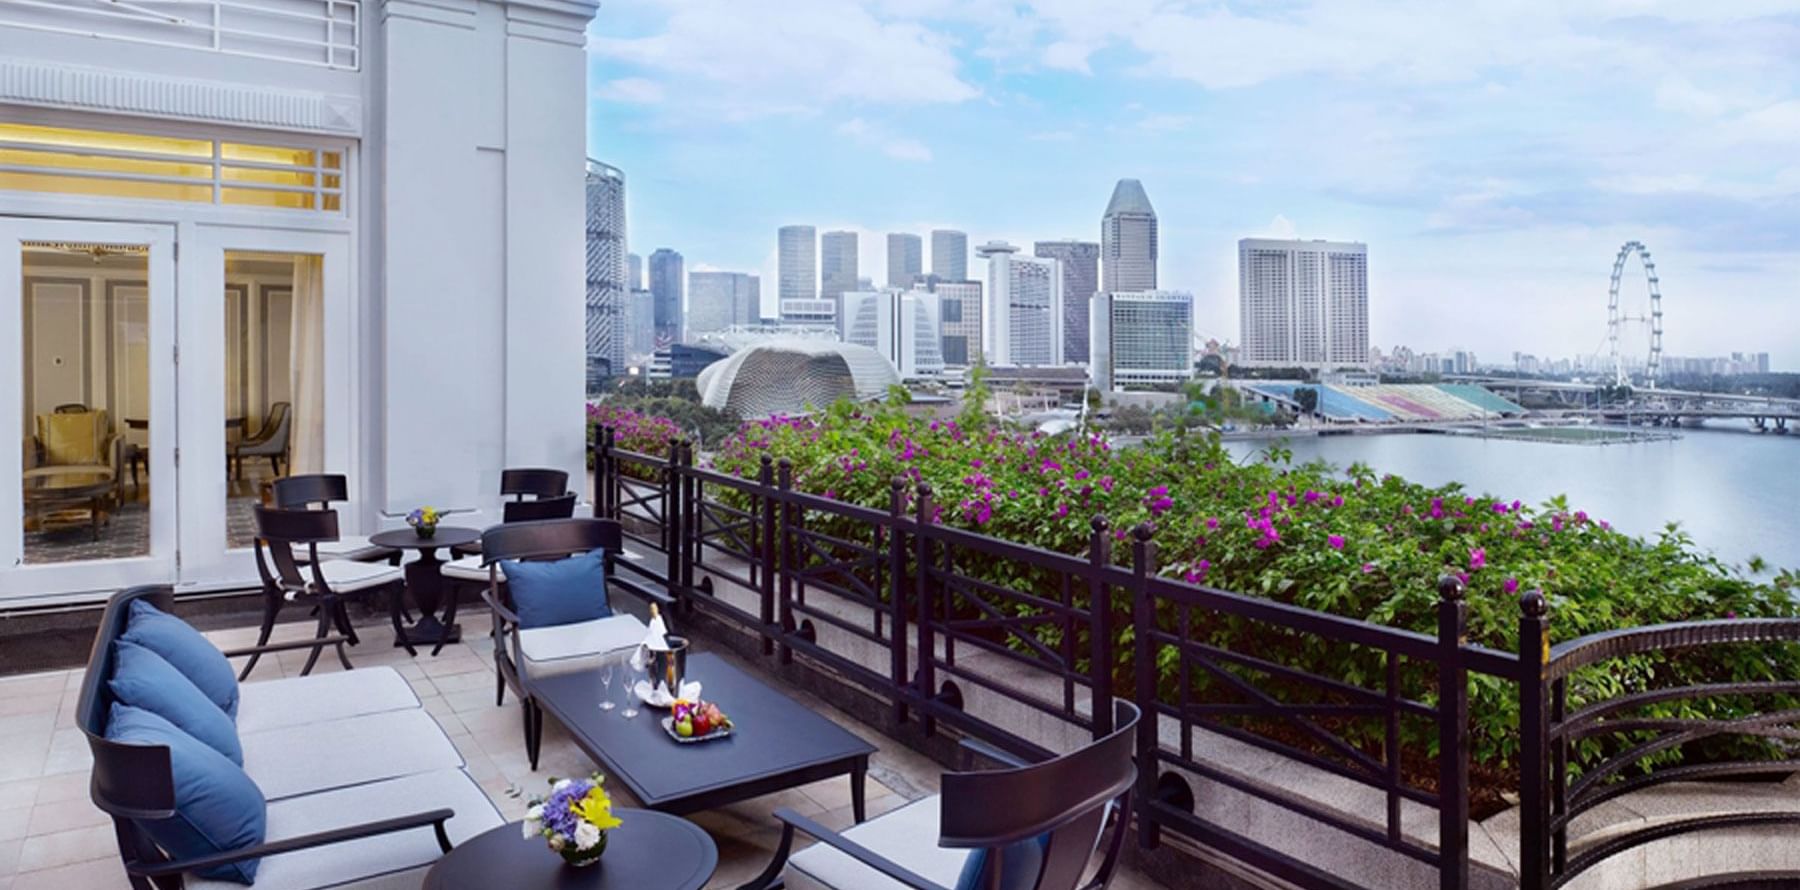 The terrace of the Fullerton Suite at the Fullerton Singapore